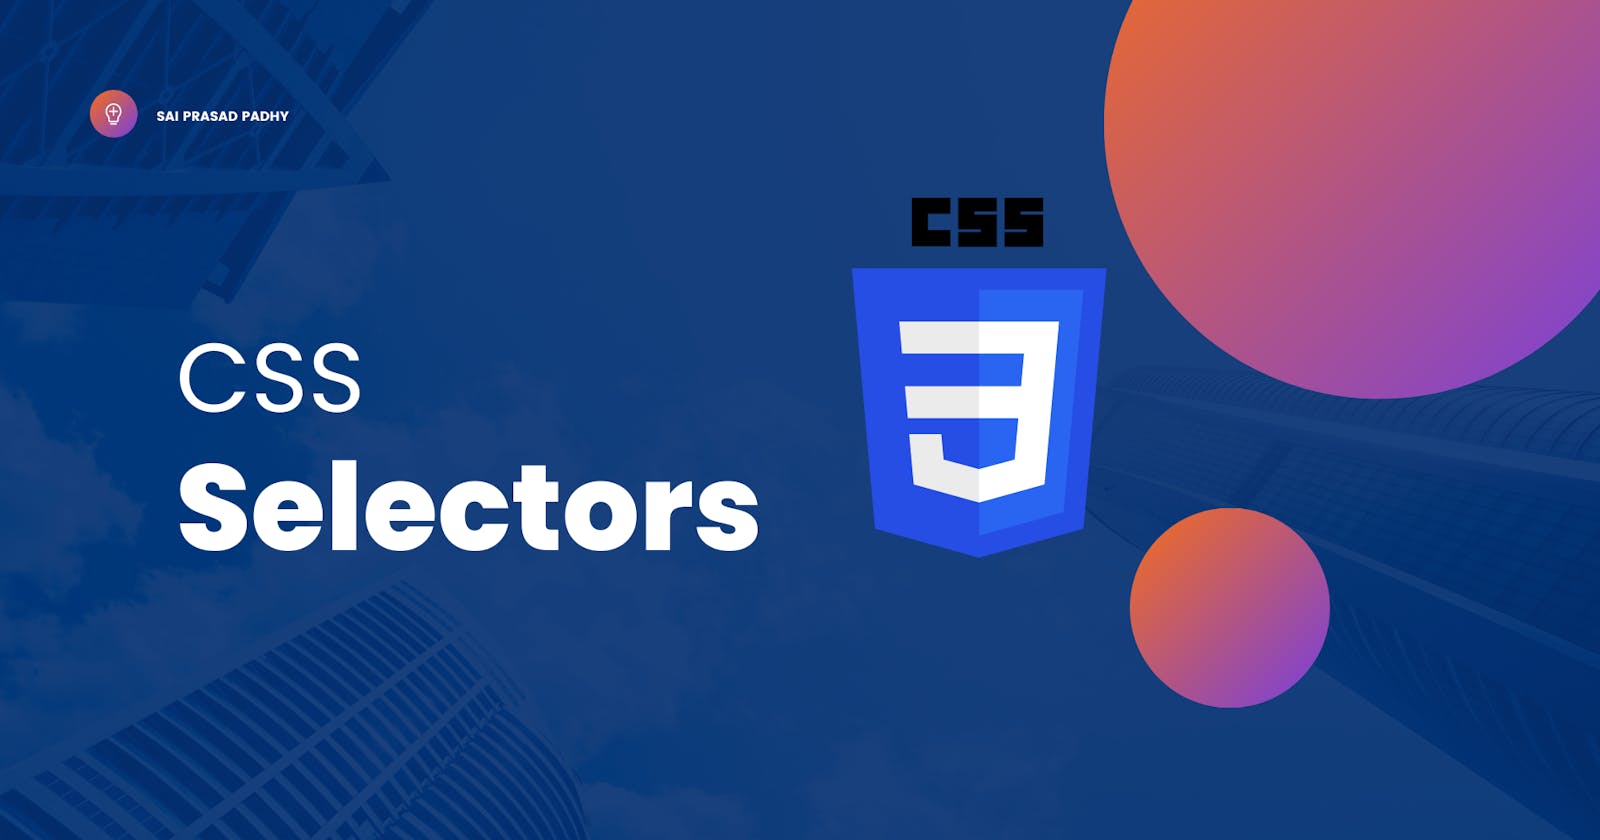 All About CSS Selectors